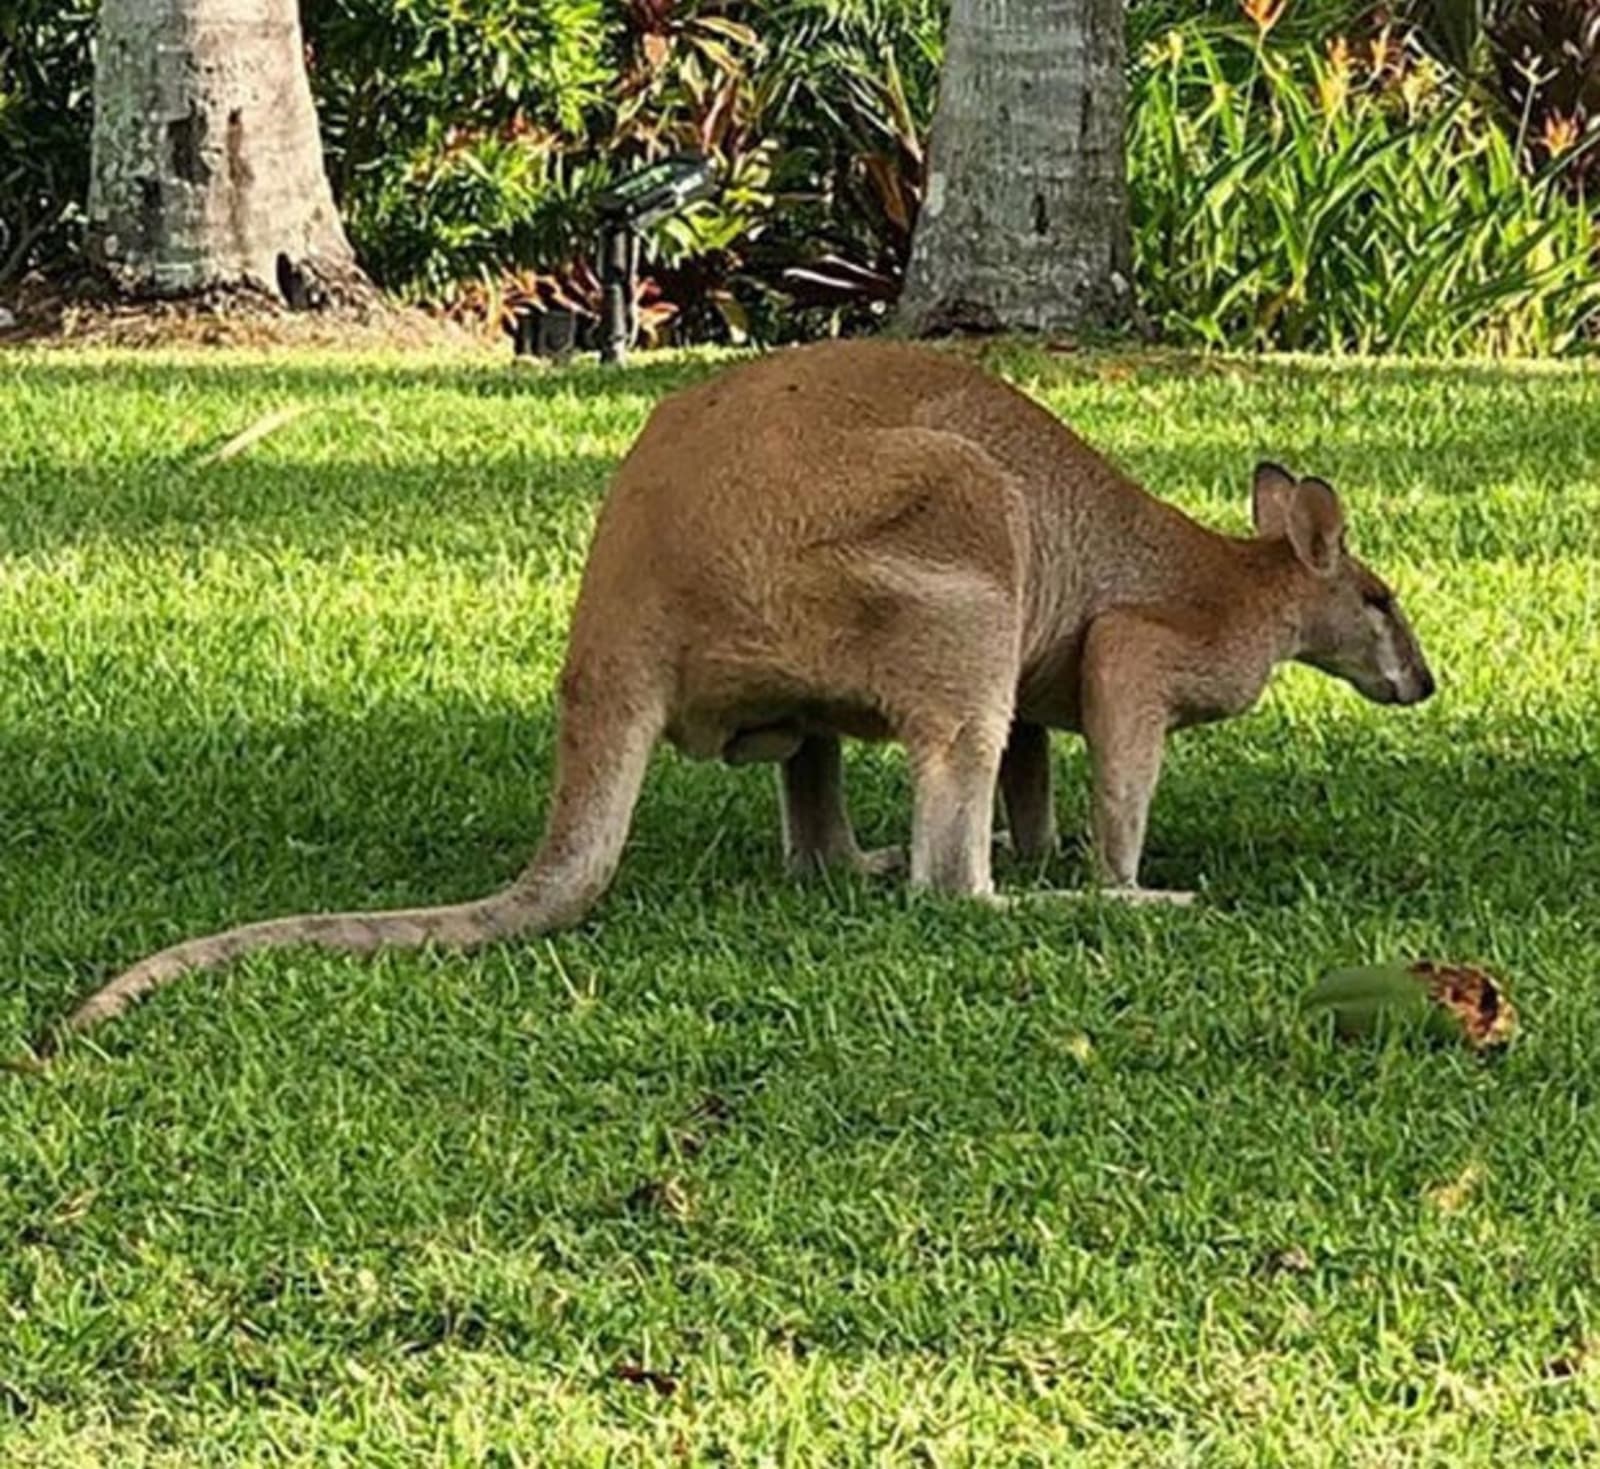 wallaby-on-the-lawn-reef-view-hotel-nadia-williams.jpg